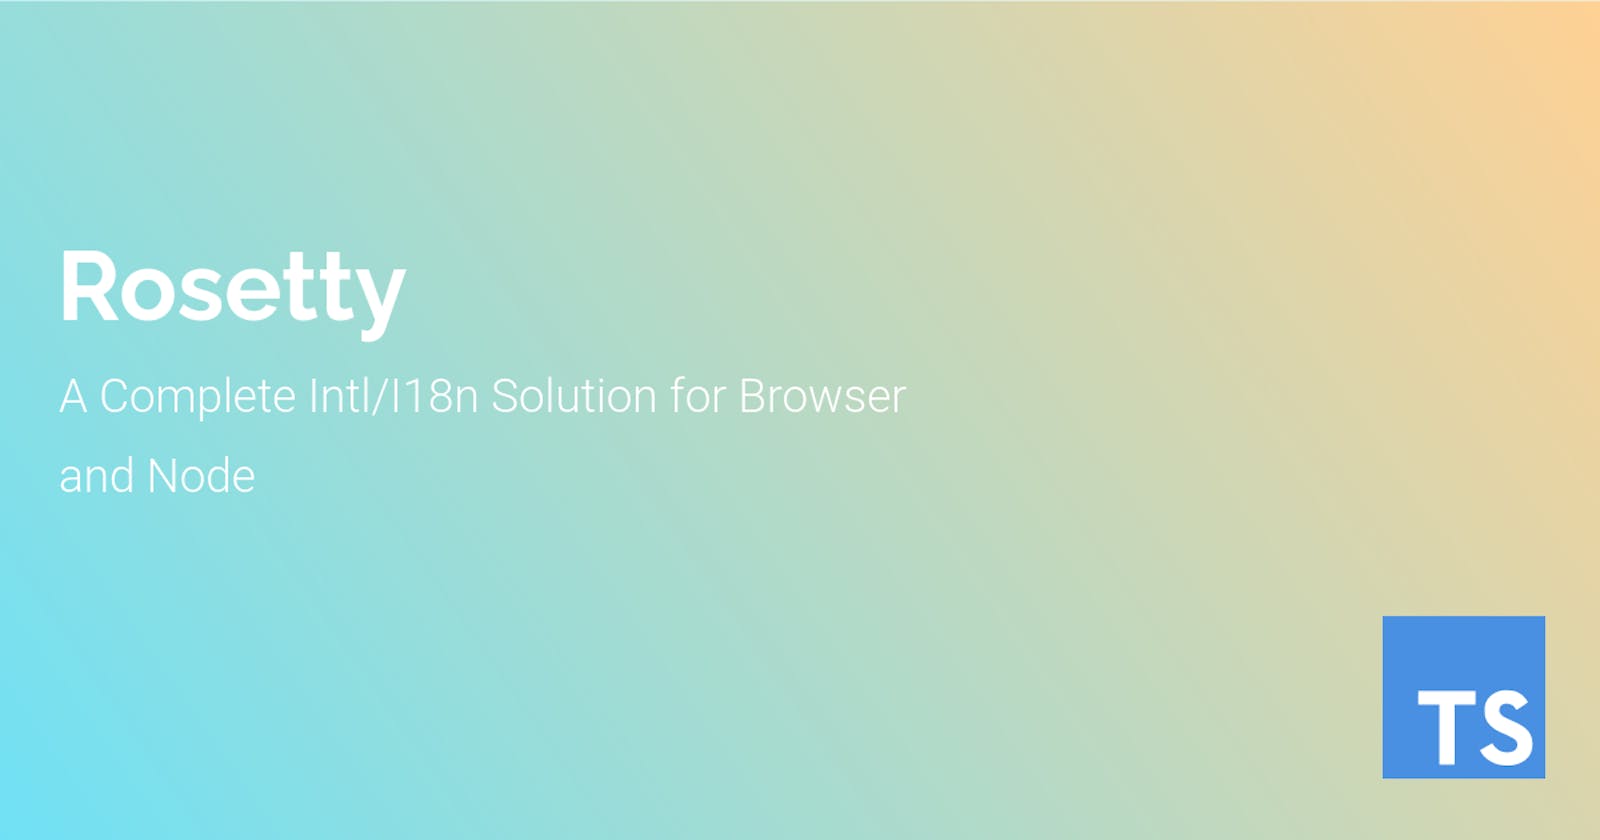 Rosetty: A Complete Intl/I18n Solution for Browser and Node